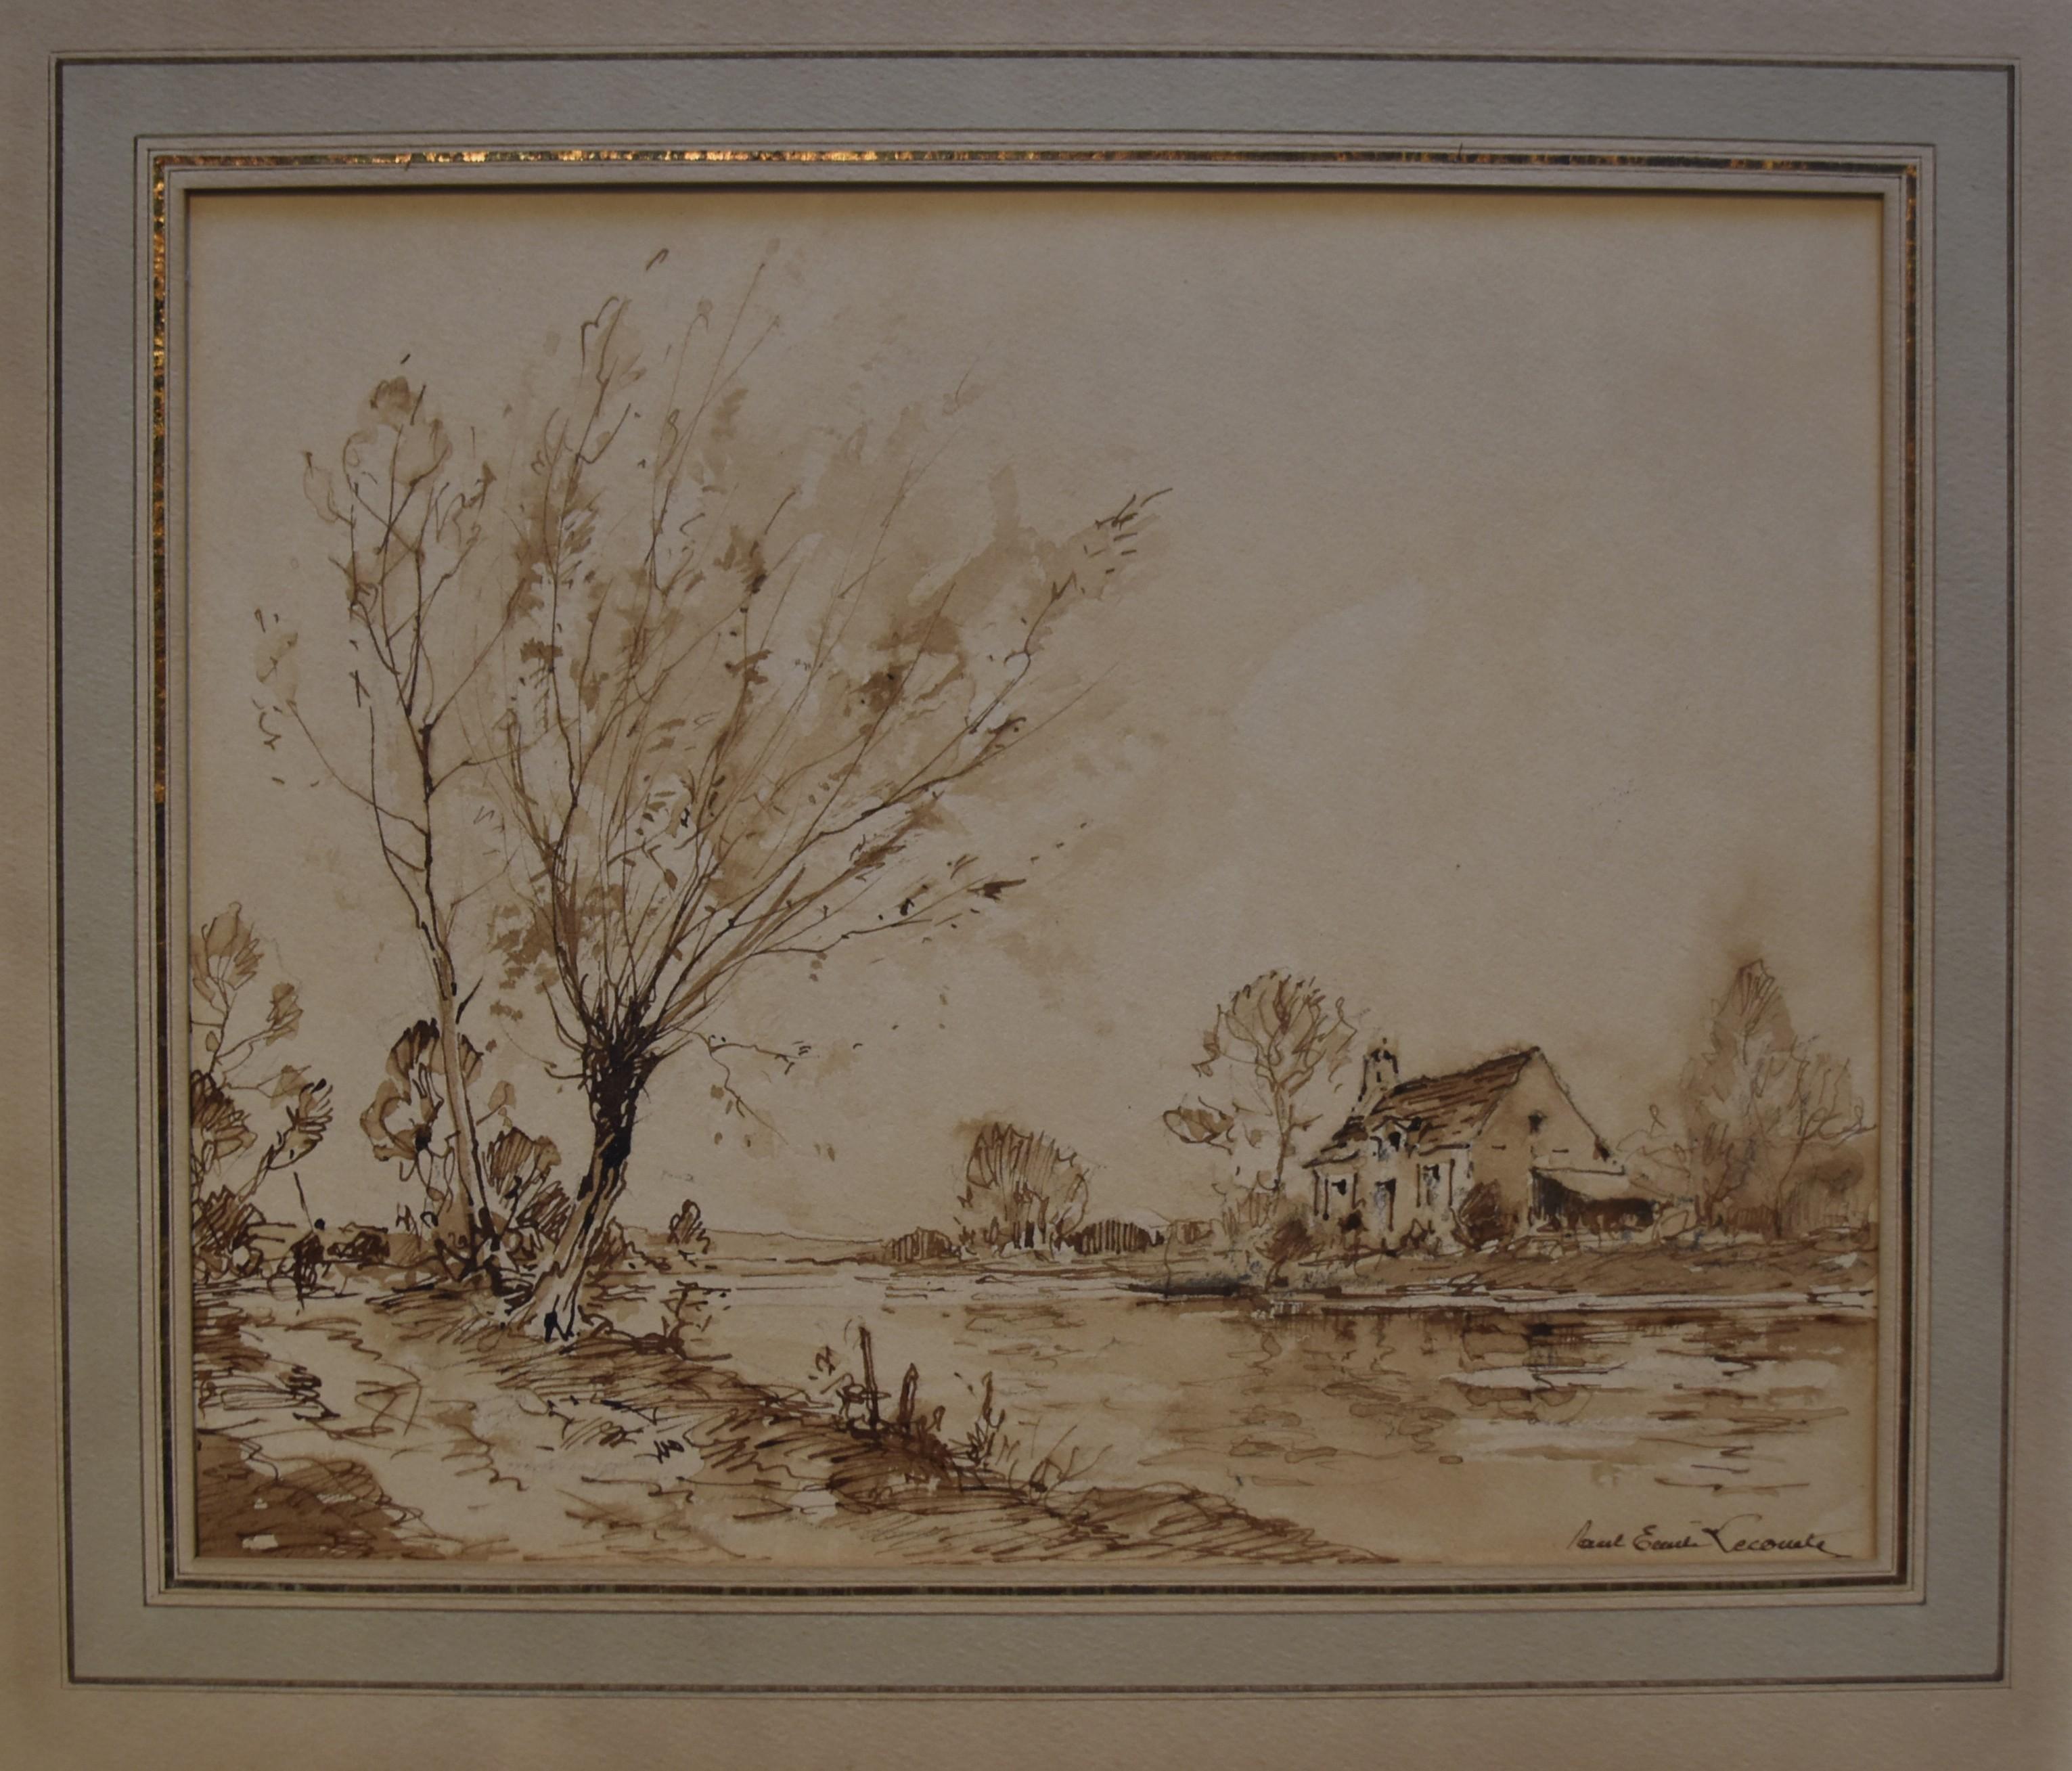 Paul Emile Lecomte (1877-1950)
A farm by the river
Signed lower right
Brown ink and brown ink wash on beige pape
21 x 26 cm
In good condition
Framed  : 33 x 37  cm

Between watercolour and drawing, this work is quite original by its technique, we